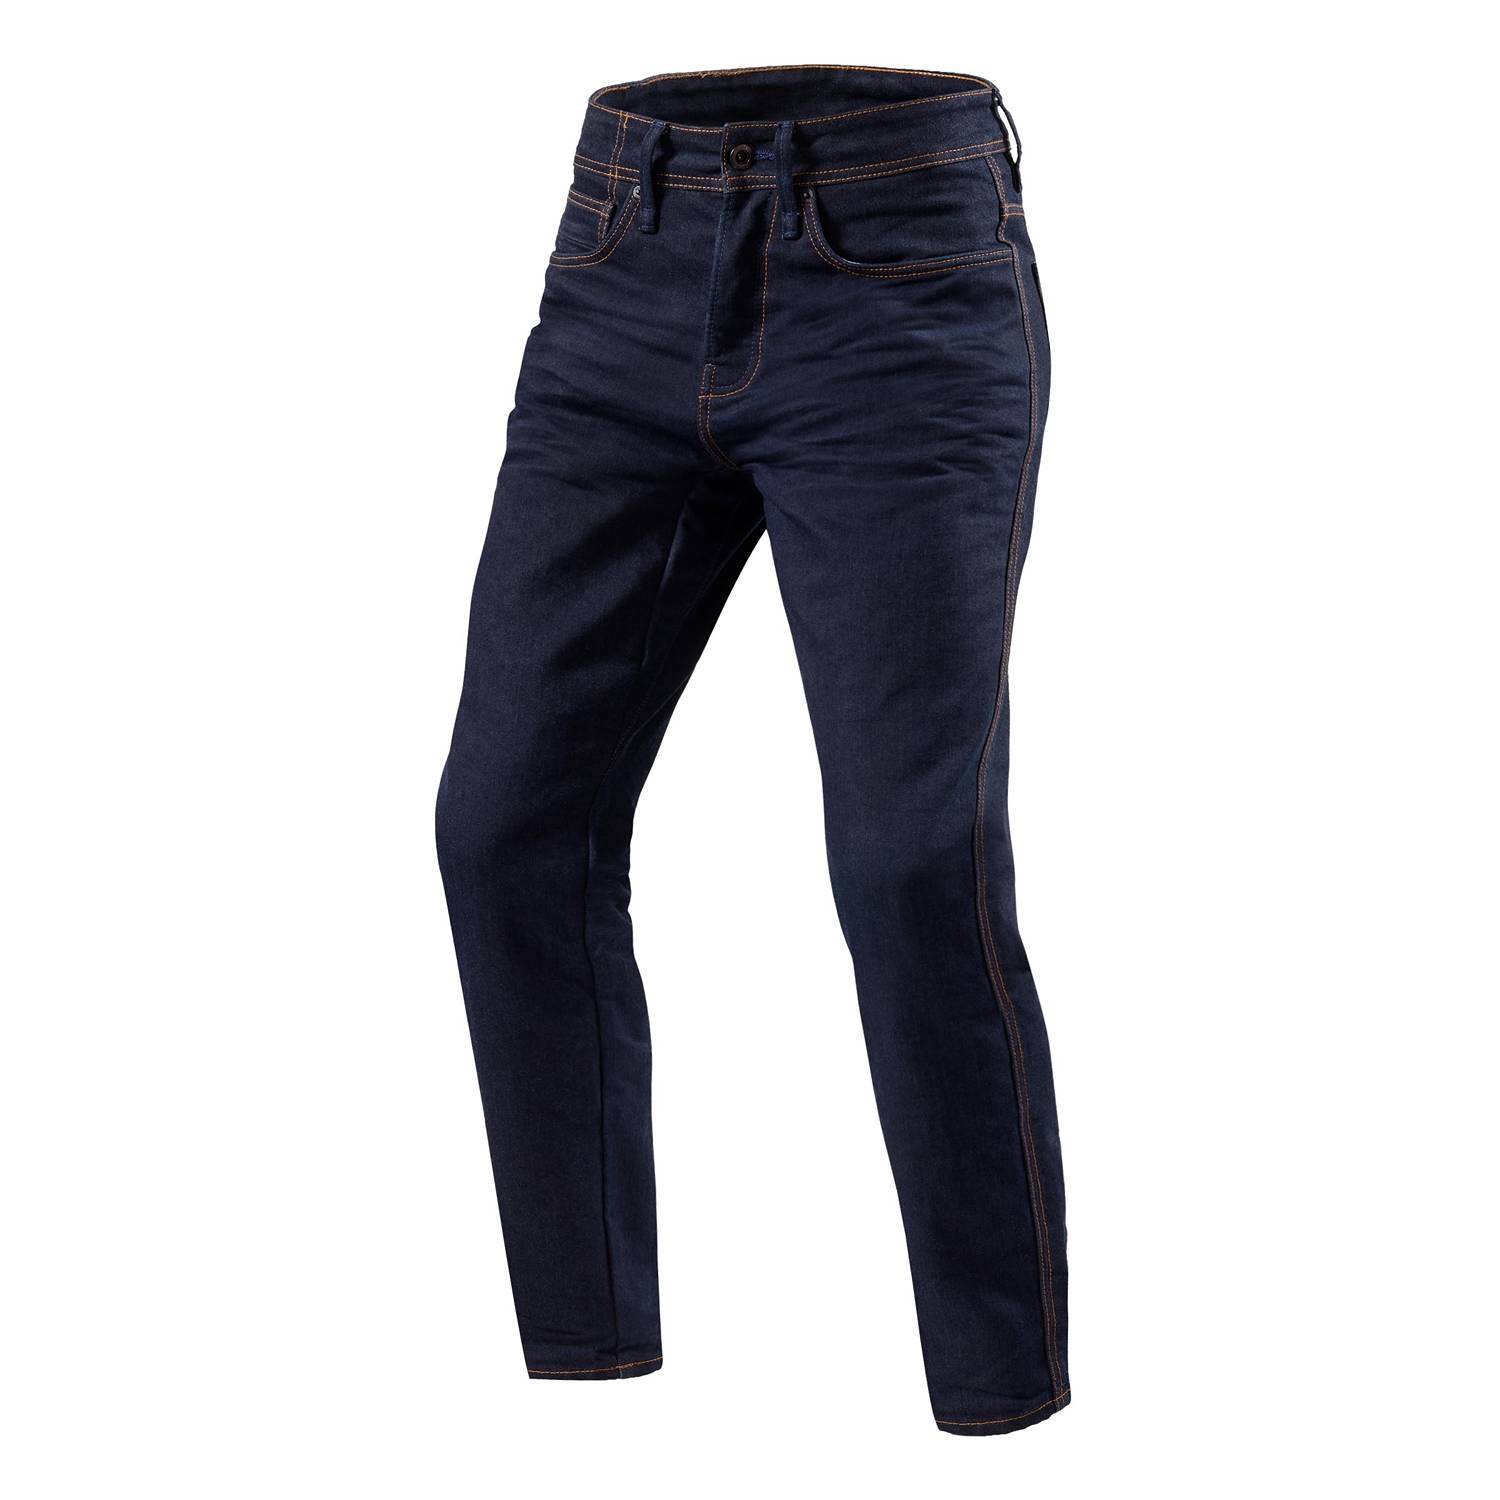 Image of REV'IT! Jeans Reed RF Dark Blue Used Motorcycle Jeans Size L34/W31 ID 8700001336895